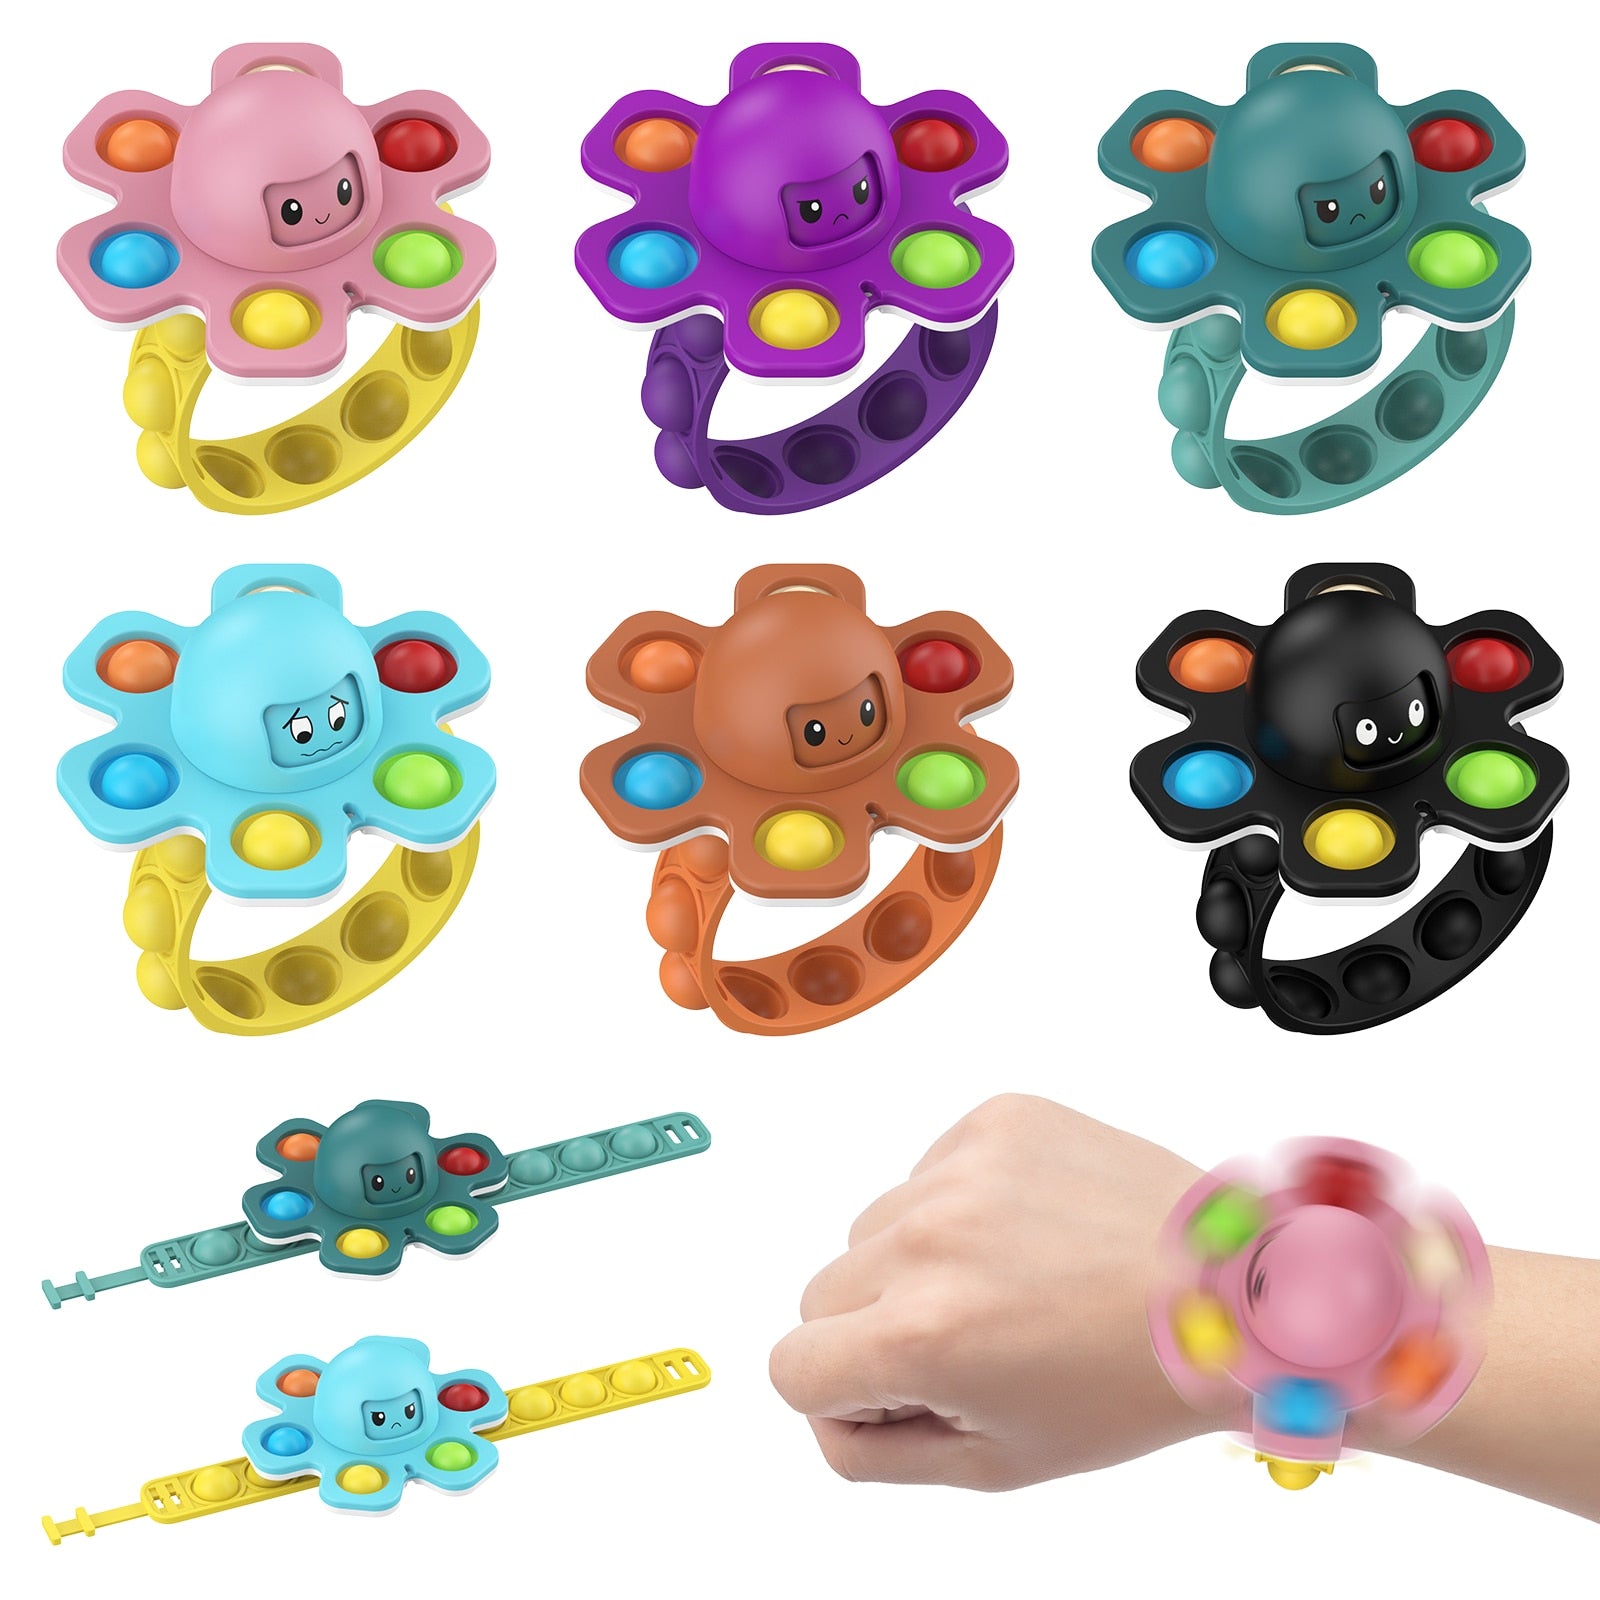 NEW Adjustable Fidget Spinner Toy Adults Anti Stress Reliever Sensory Kids Toys For Children Push Bubble Bracelet Wristband